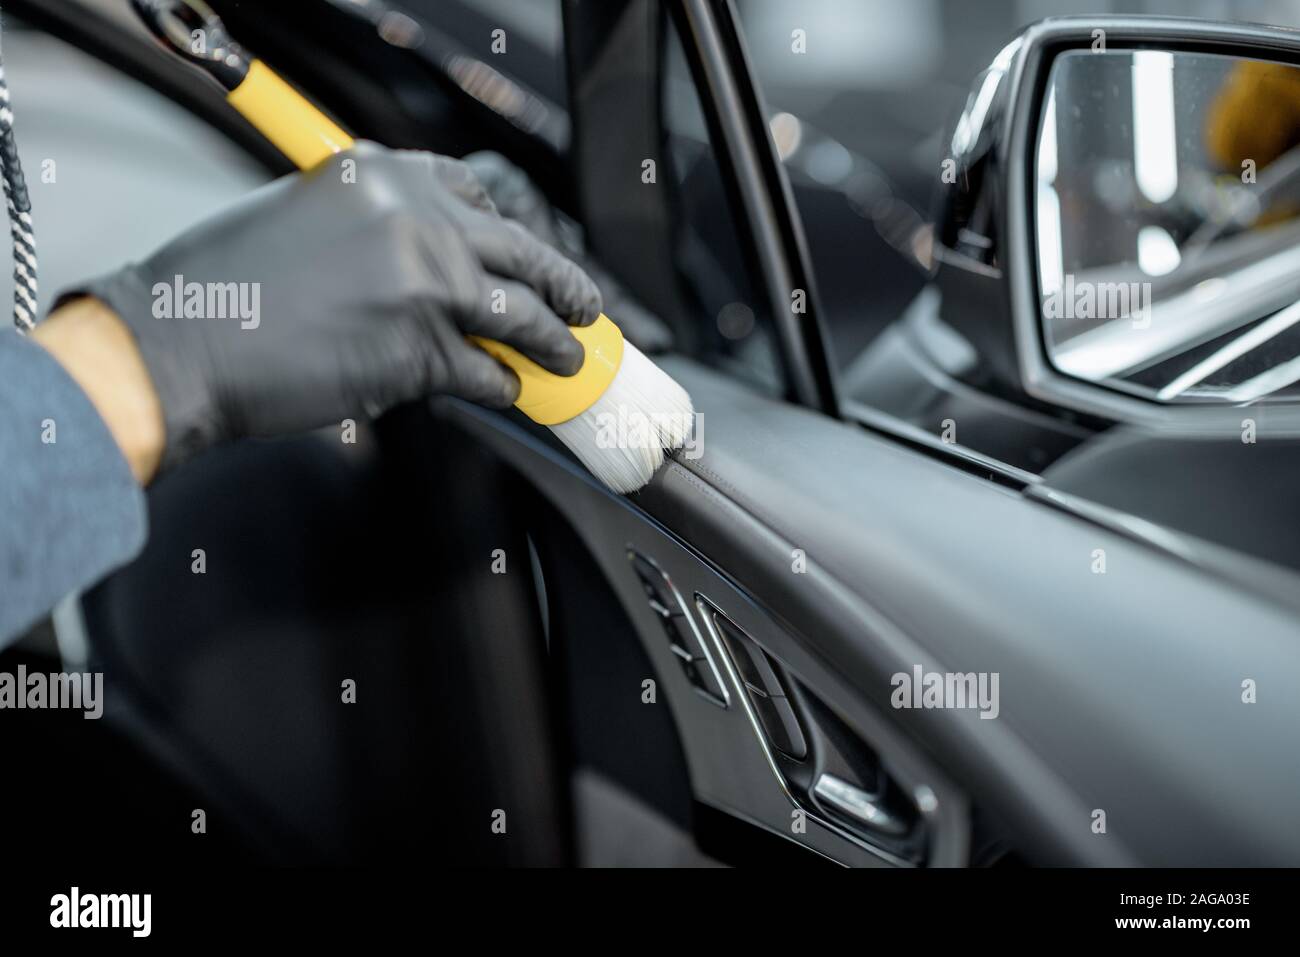 Worker provides a professional vehicle interior cleaning, wiping door panel with a brush at the car service station, close-up view Stock Photo